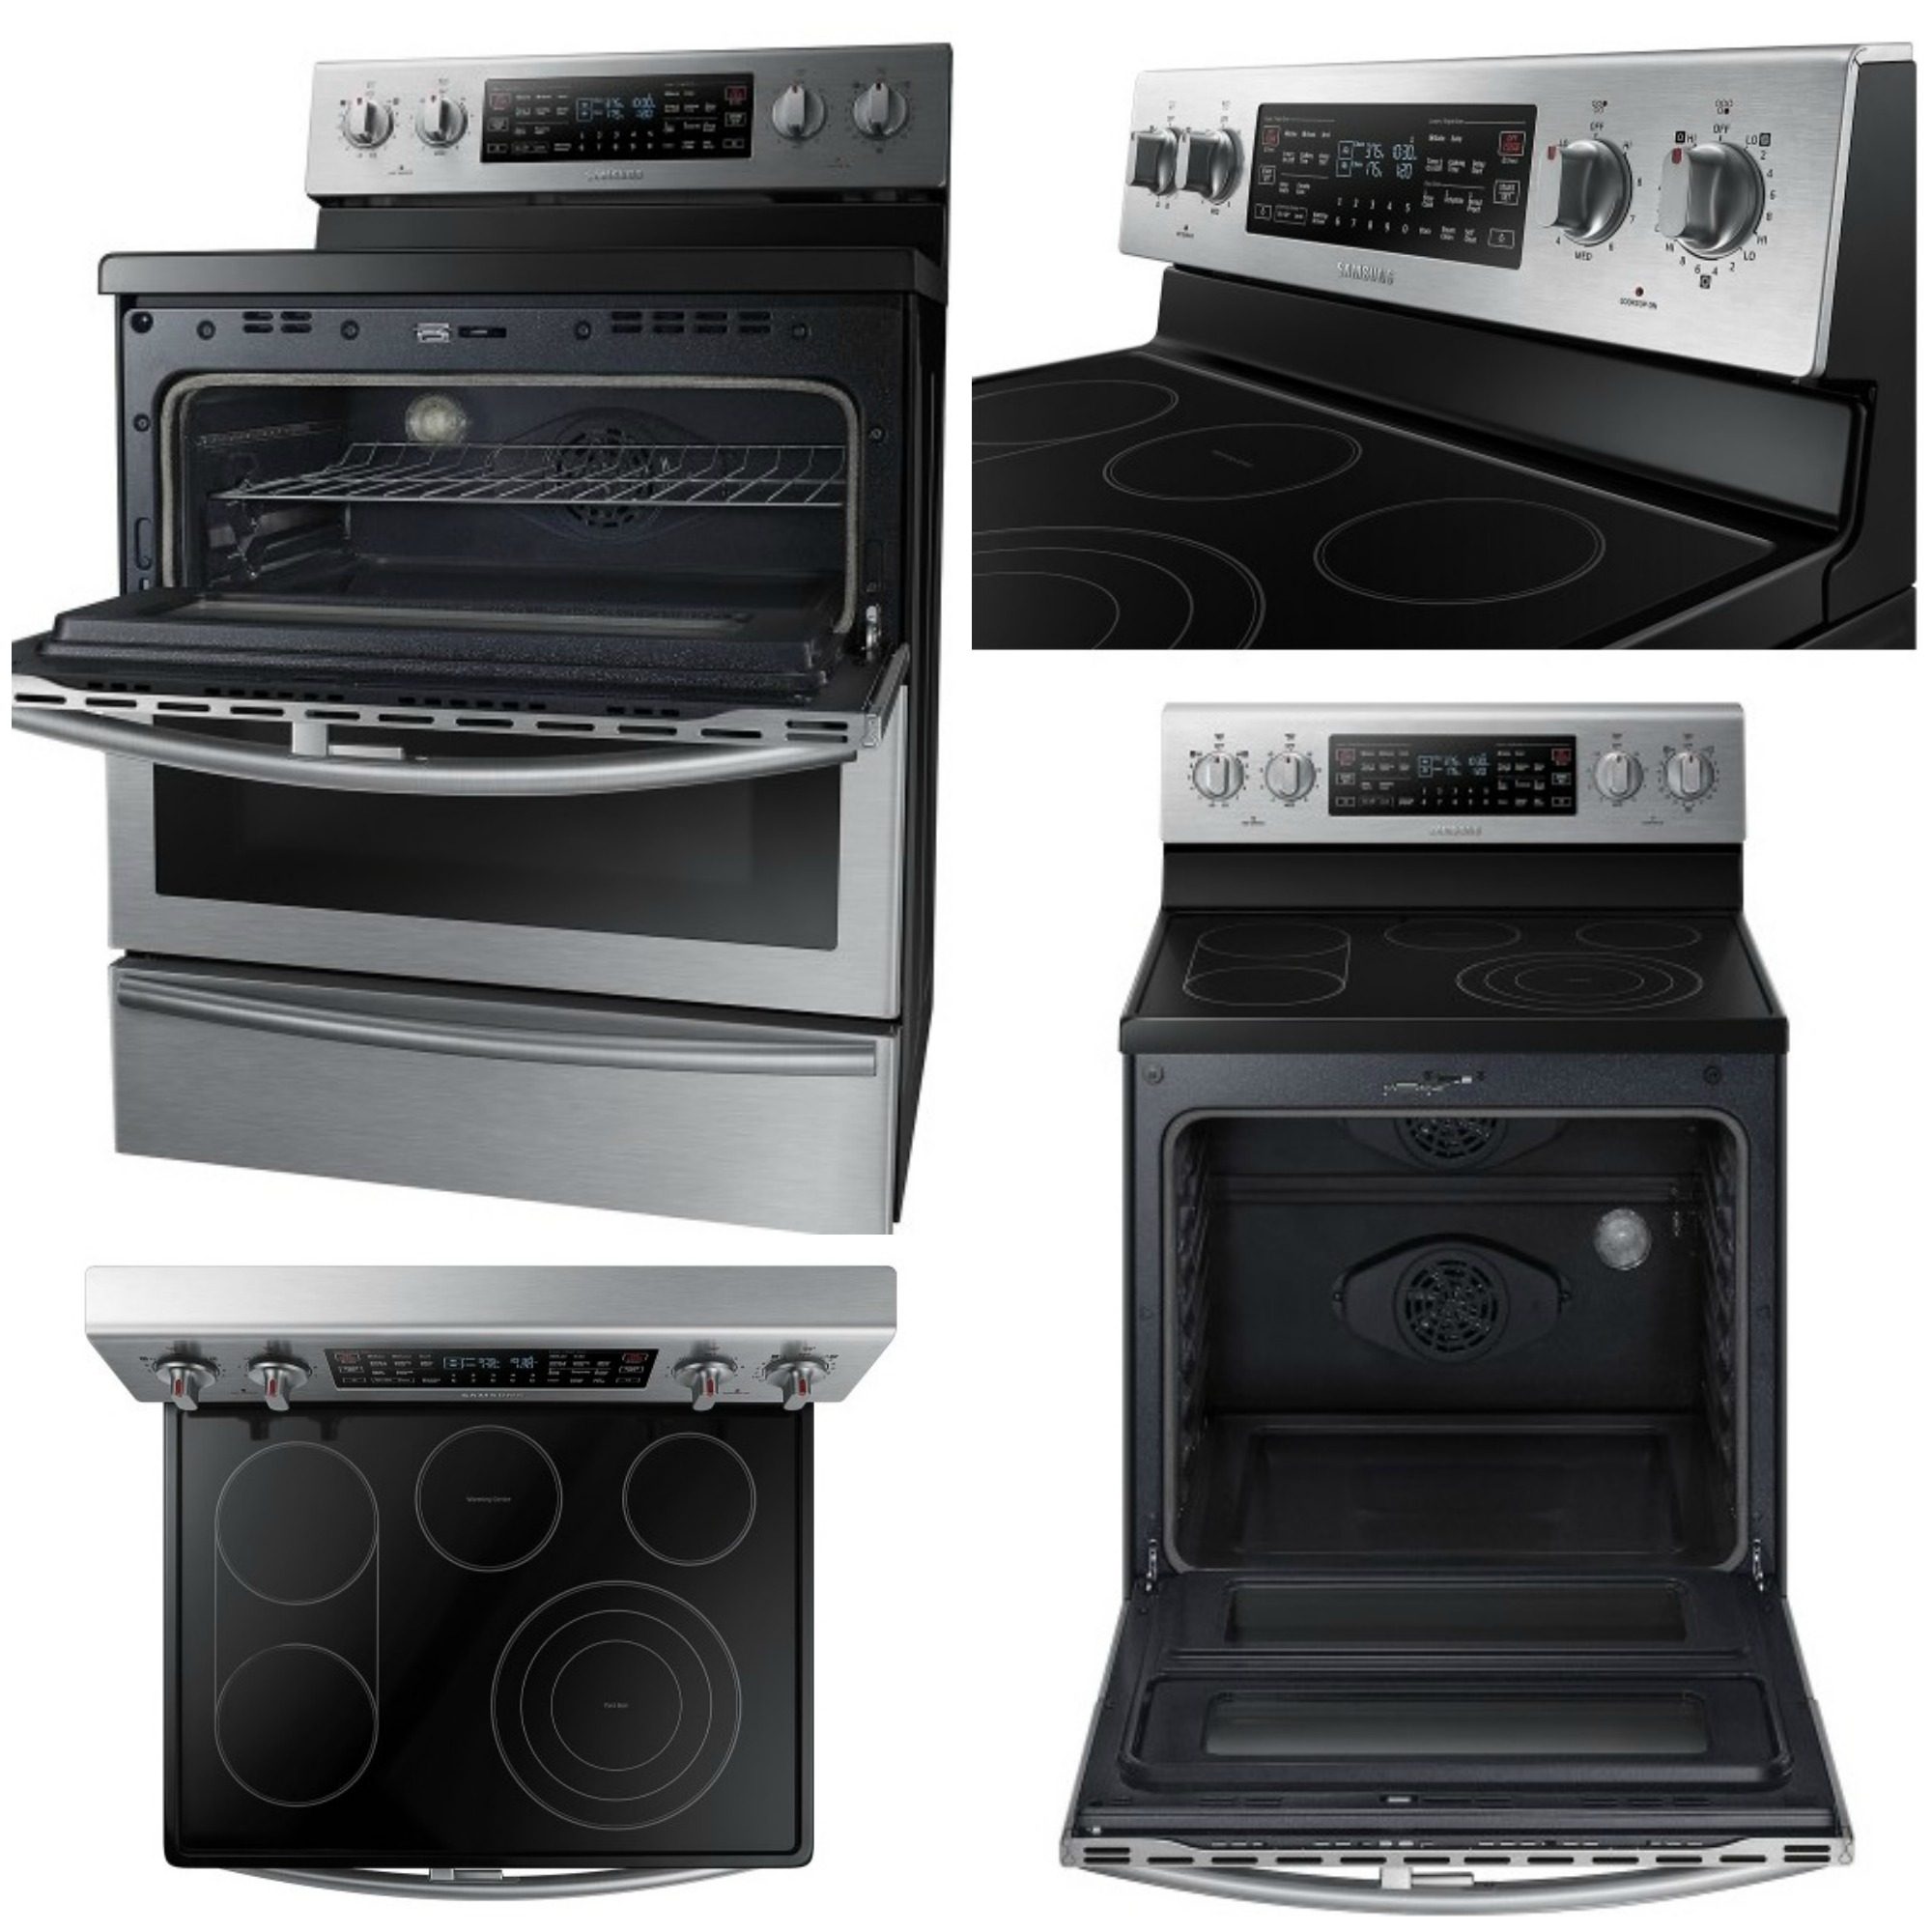 My New Obsession, The Samsung Dual Door Electric Range #masteryourhome